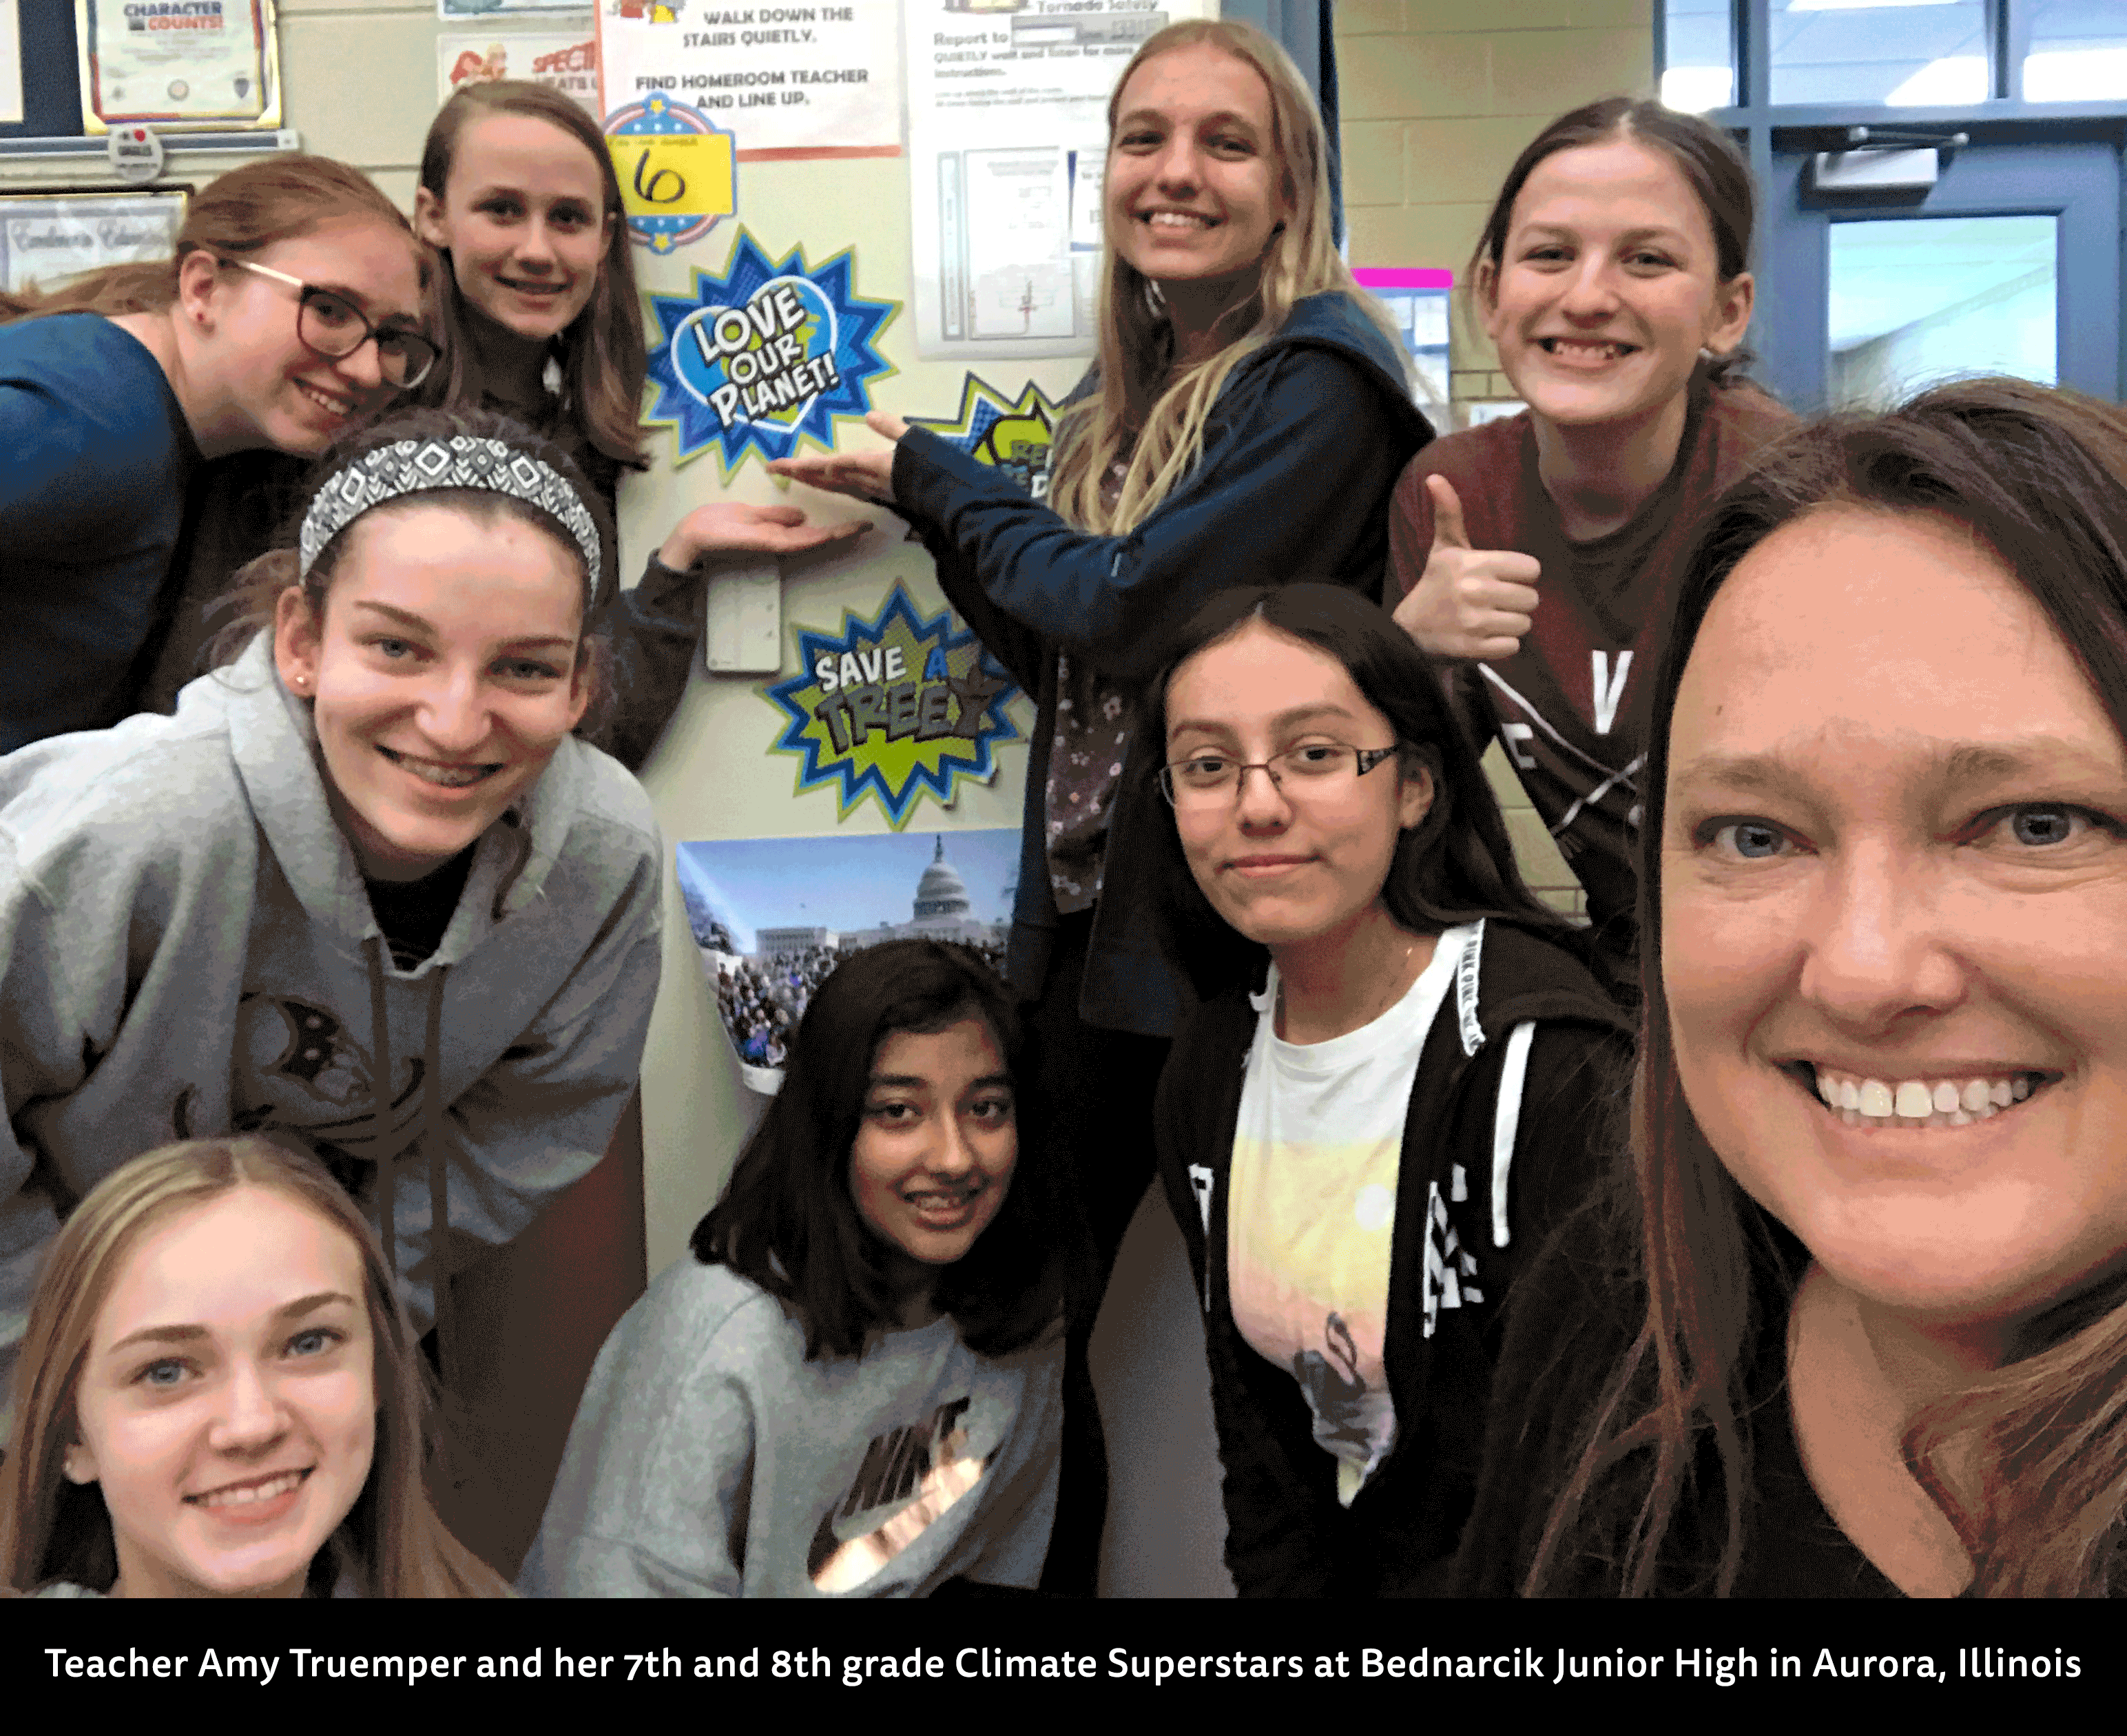 Teacher Amy Truemper and her 7th and 8th grade Climate Superstars at Bednarcik Junior High in Aurora, Illinois